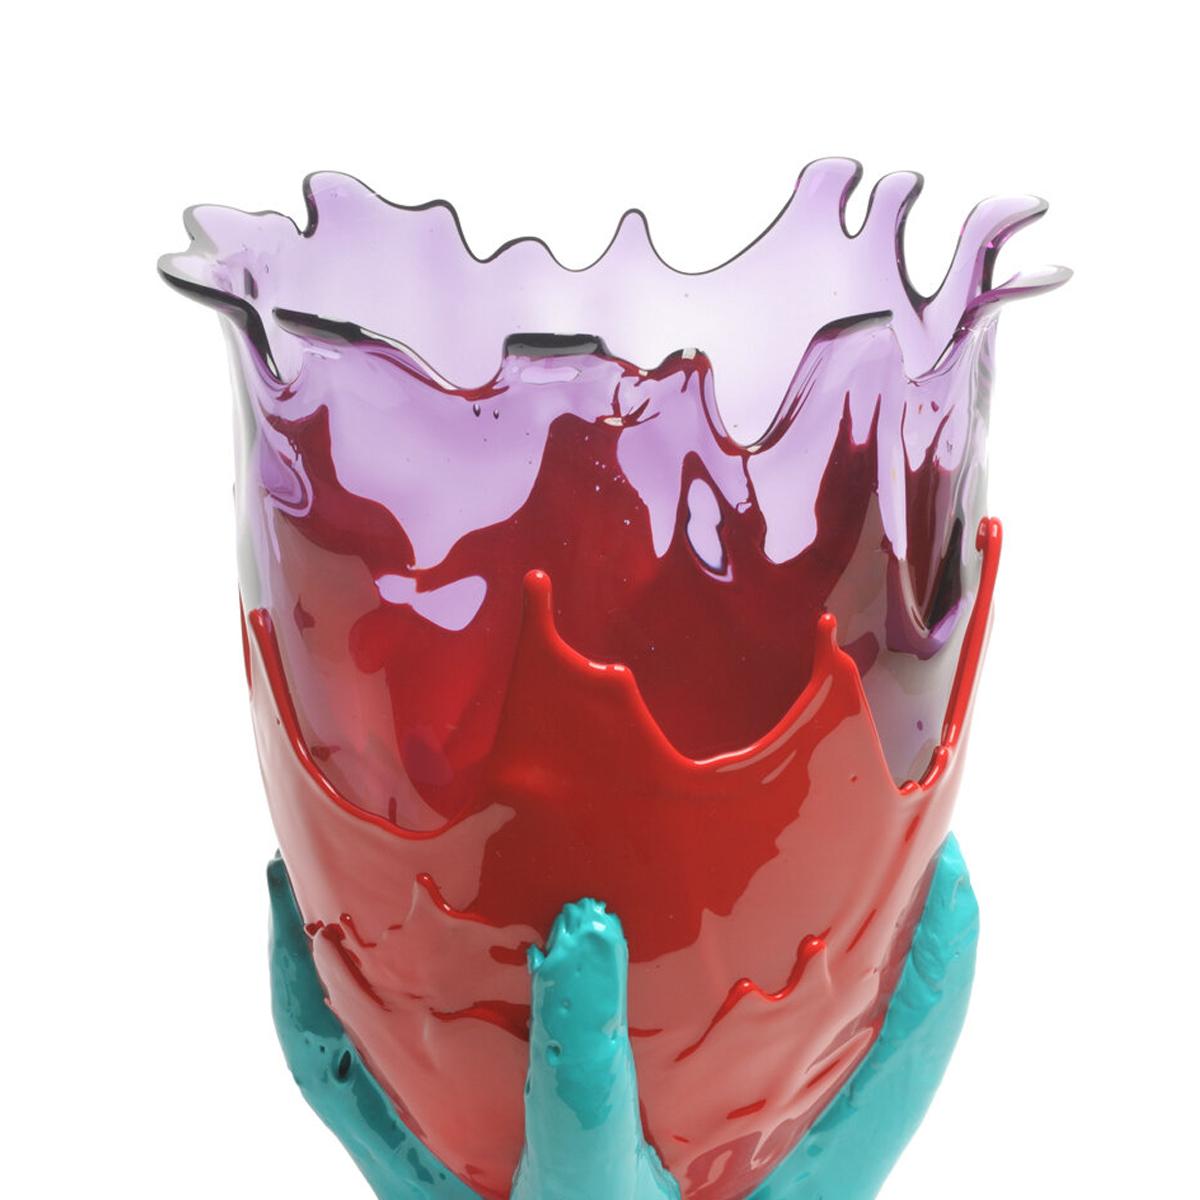 Clear extra colour vase - clear lilac, matt red, matt turquoise.

Vase in soft resin designed by Gaetano Pesce in 1995 for Fish Design collection.

Measures: XL Ø 30cm x H 56cm
Colours: clear lilac, matt red, matt turquoise.
Other sizes